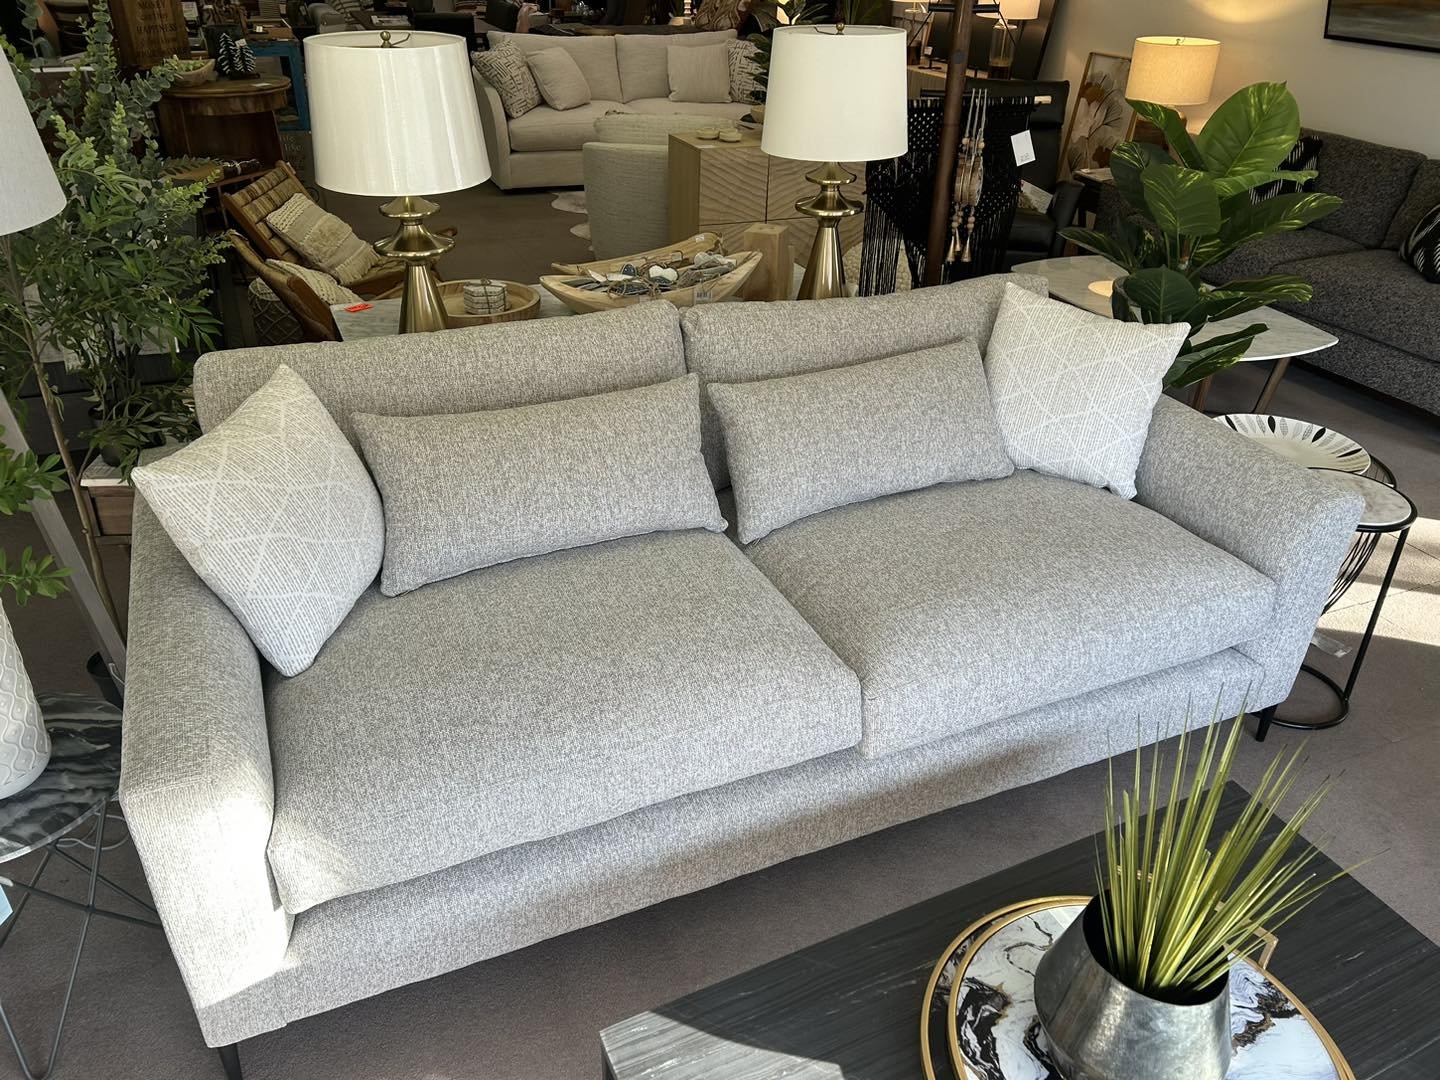 Sit back and #relax in the all new &lsquo;Carmel&rsquo; sofa by Stylus, Made to Order Sofas featuring 45&rdquo; deep feather soft seating! The Carmel is available in hundreds of fabric choices as well as sectional configurations to suit your space&he